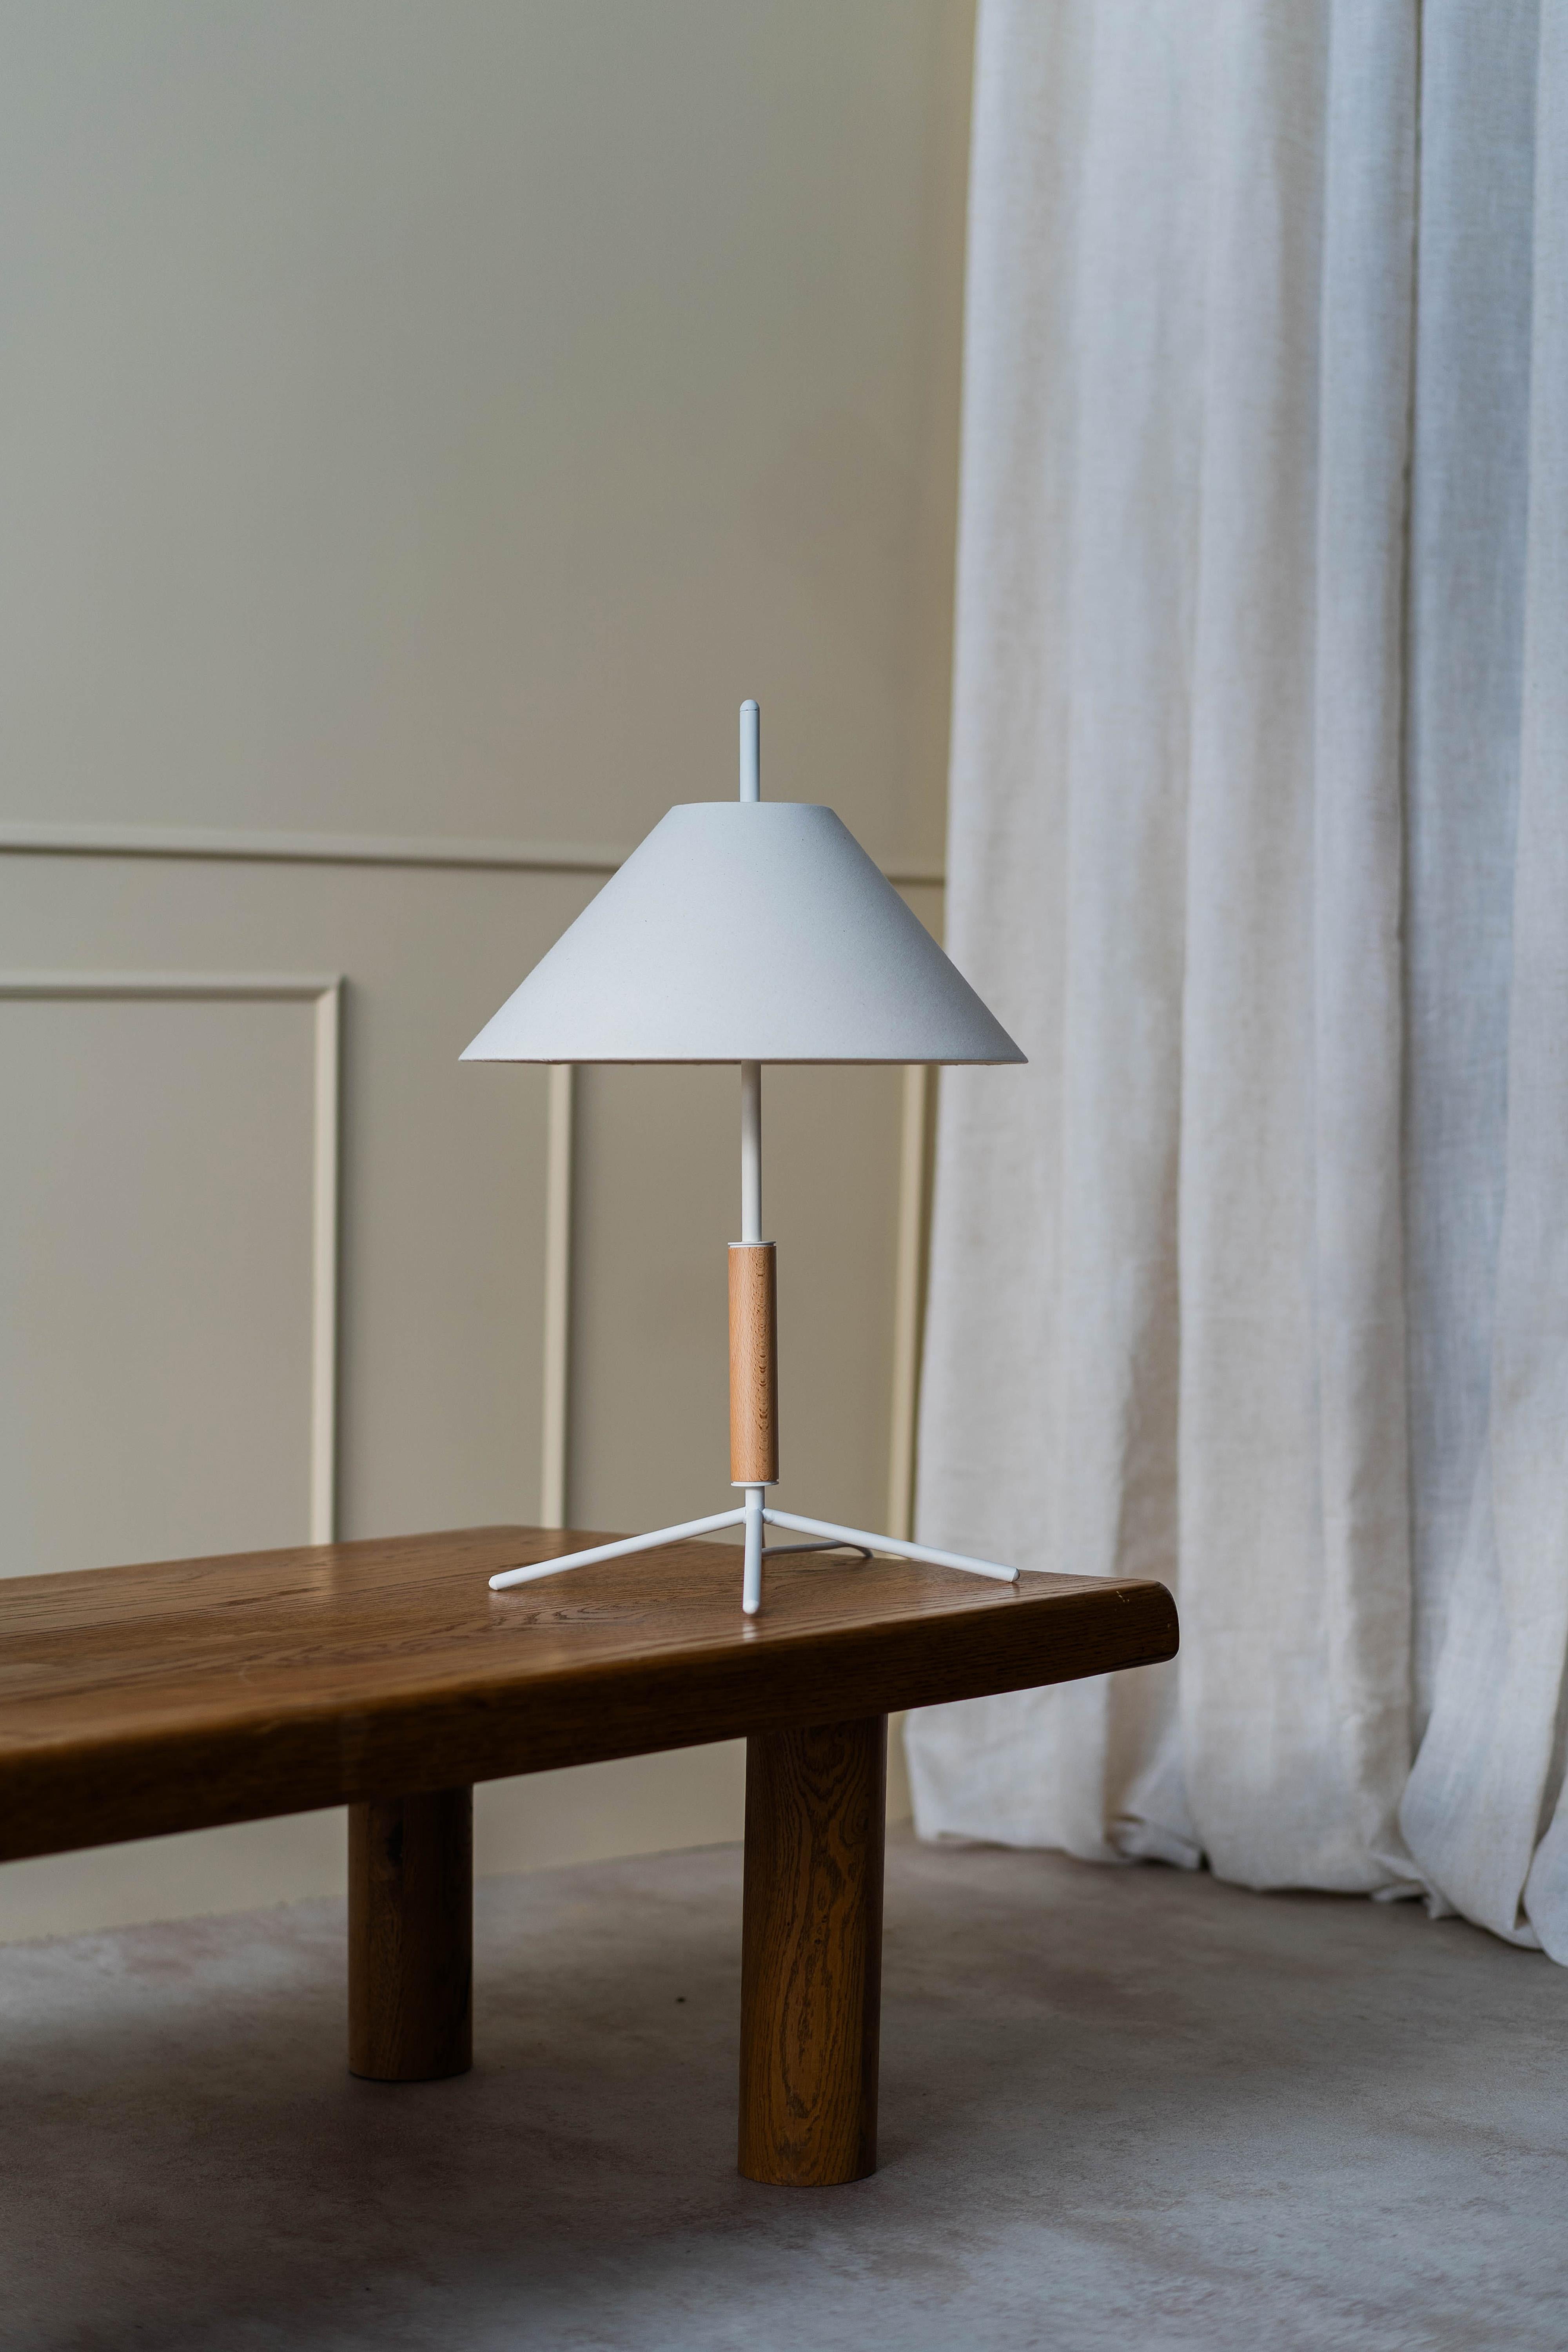 Moderne Contemporary, Handmade Table Lamp, White, Fabric, Wood, by Mediterranean Objects en vente